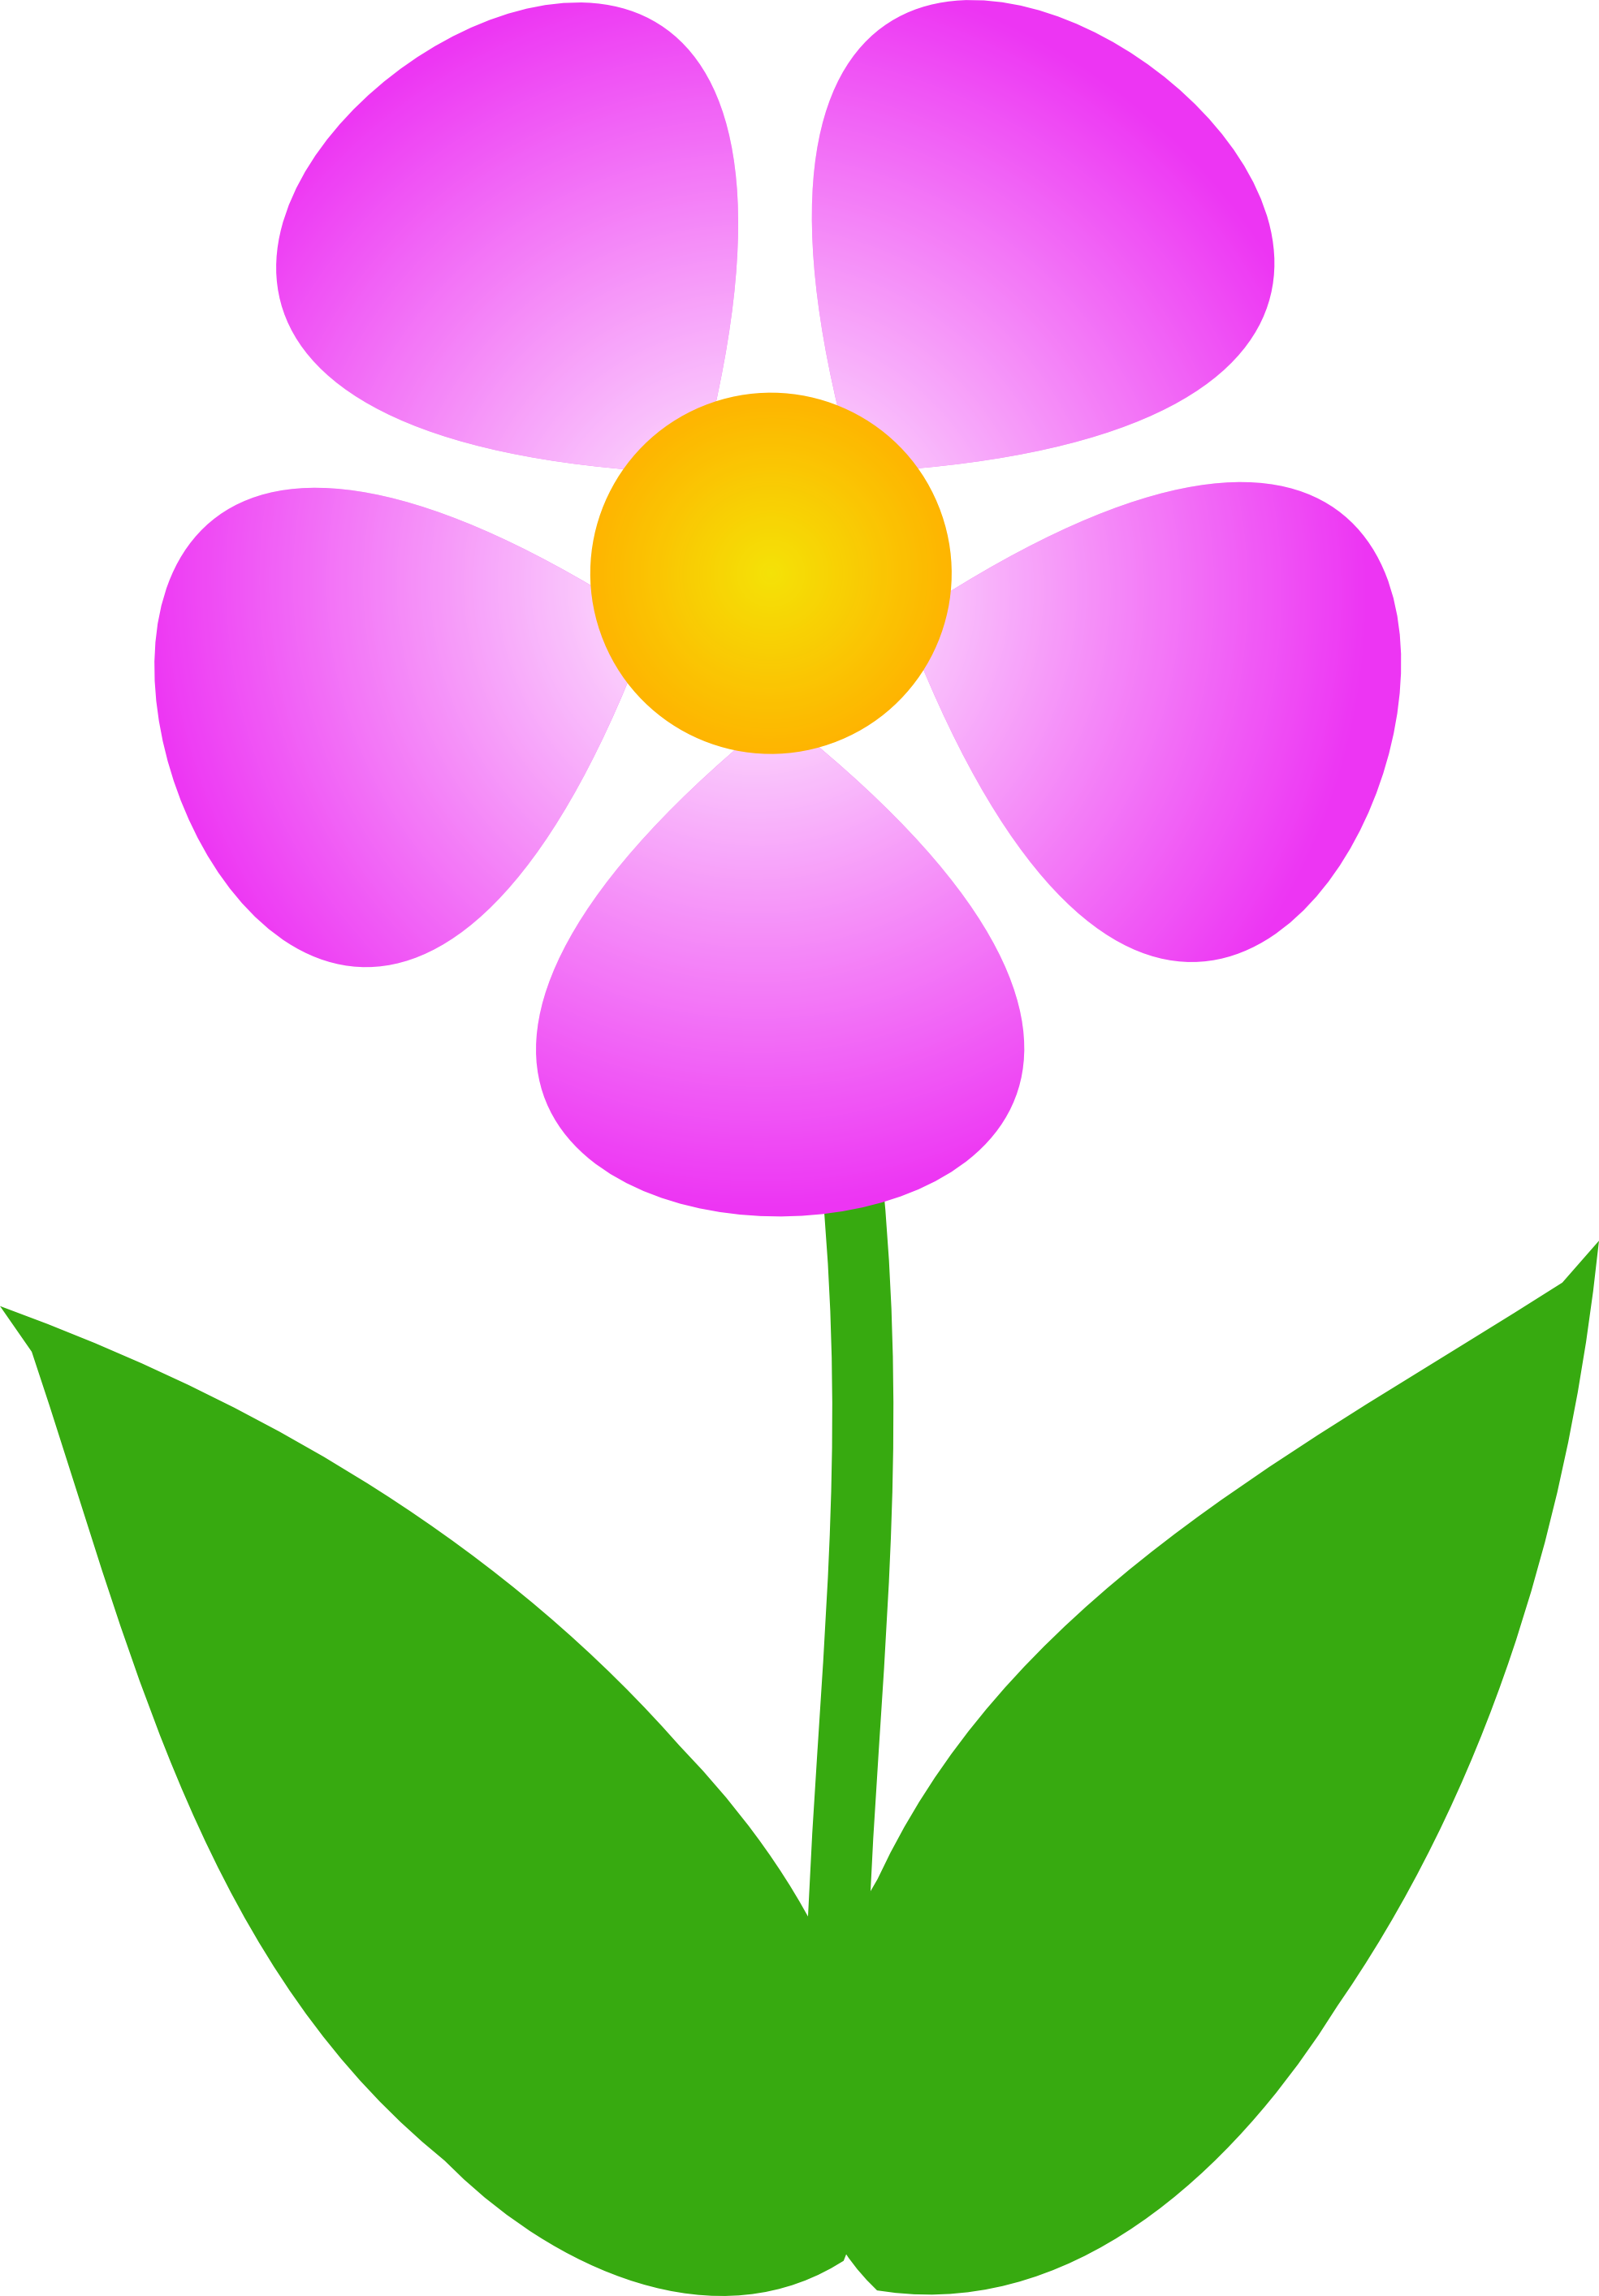 clipart images of spring flowers - photo #22